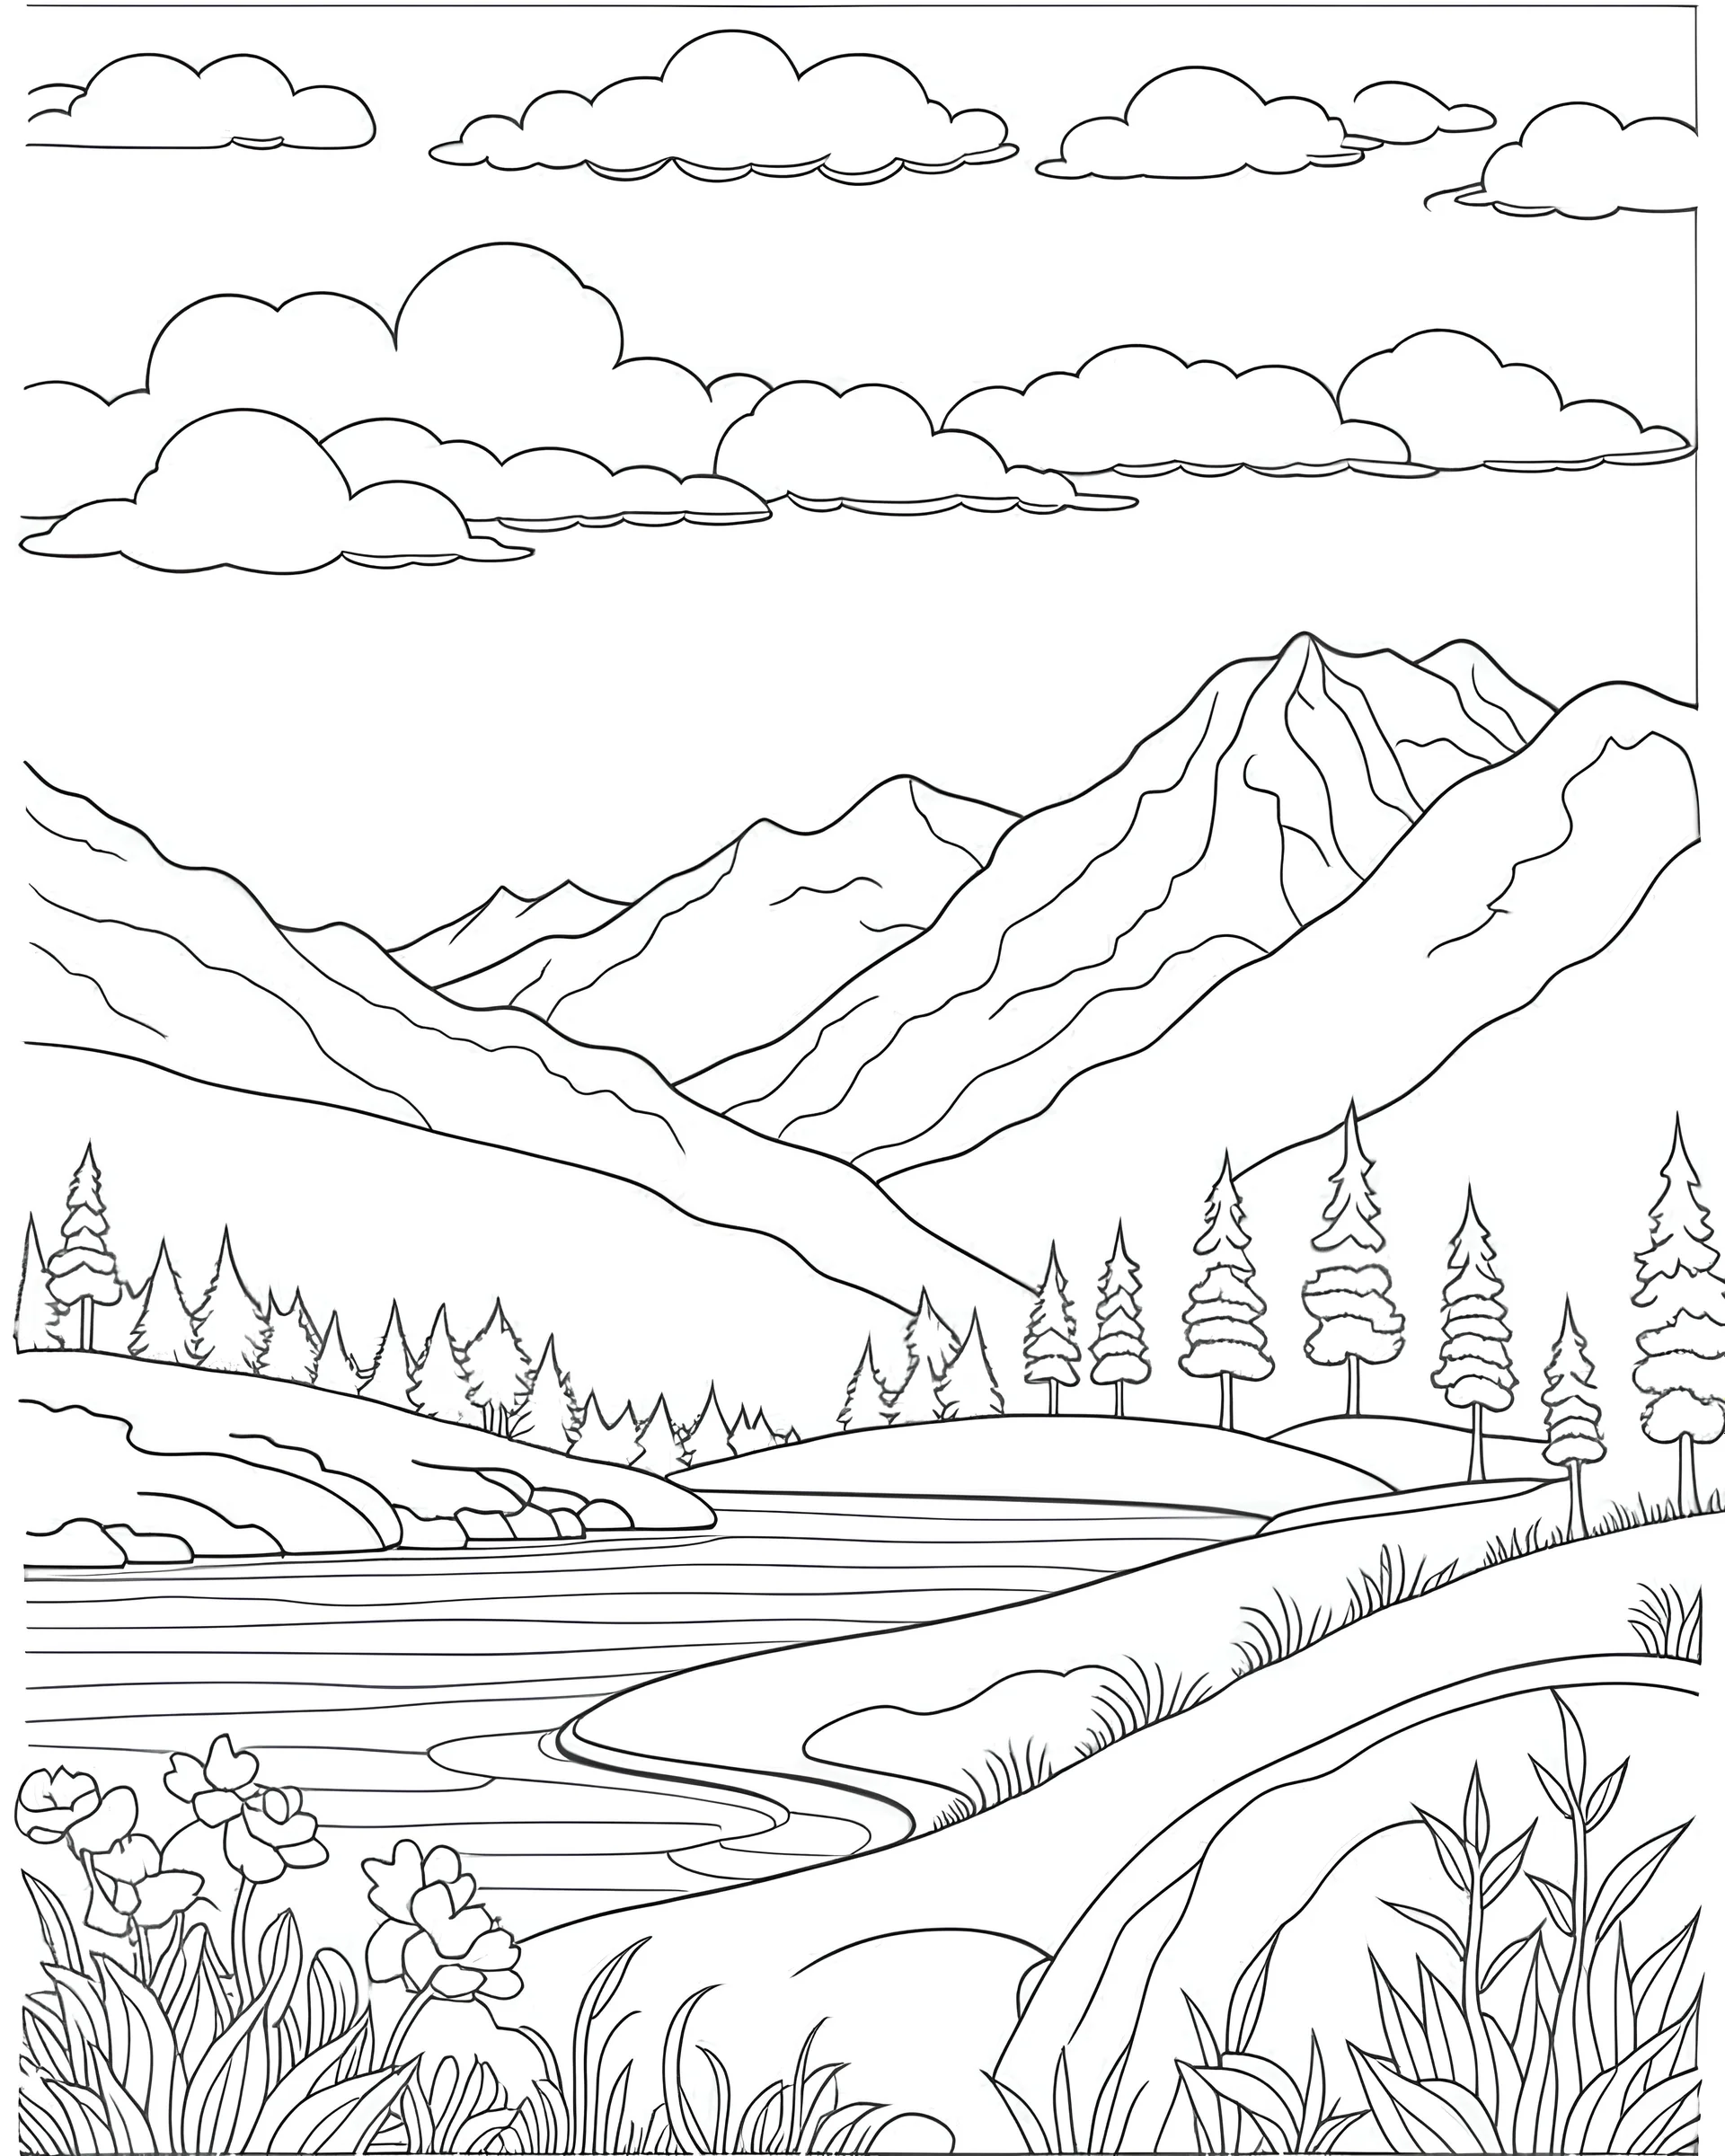 coloring book page, Generate argentinian nature landscape background. clean and simple line art